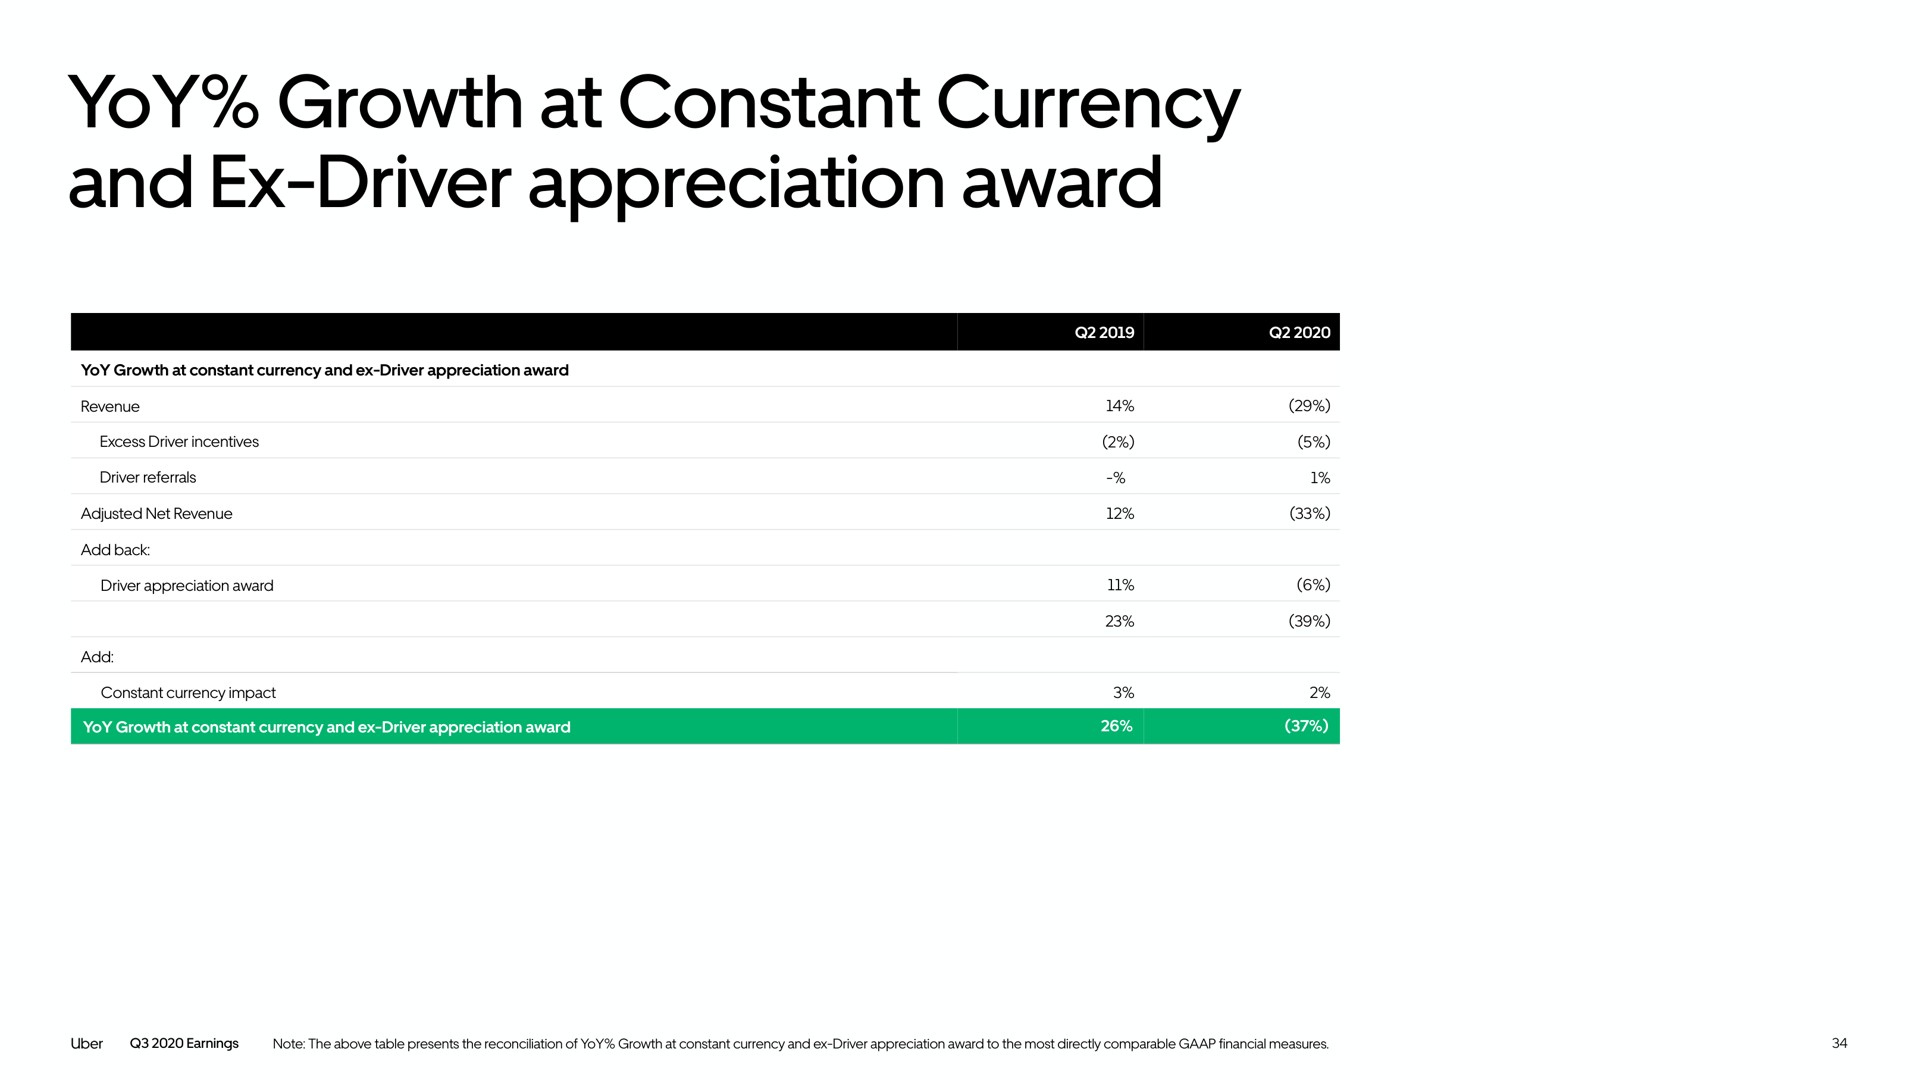 yoy growth at constant currency and driver appreciation award | Uber